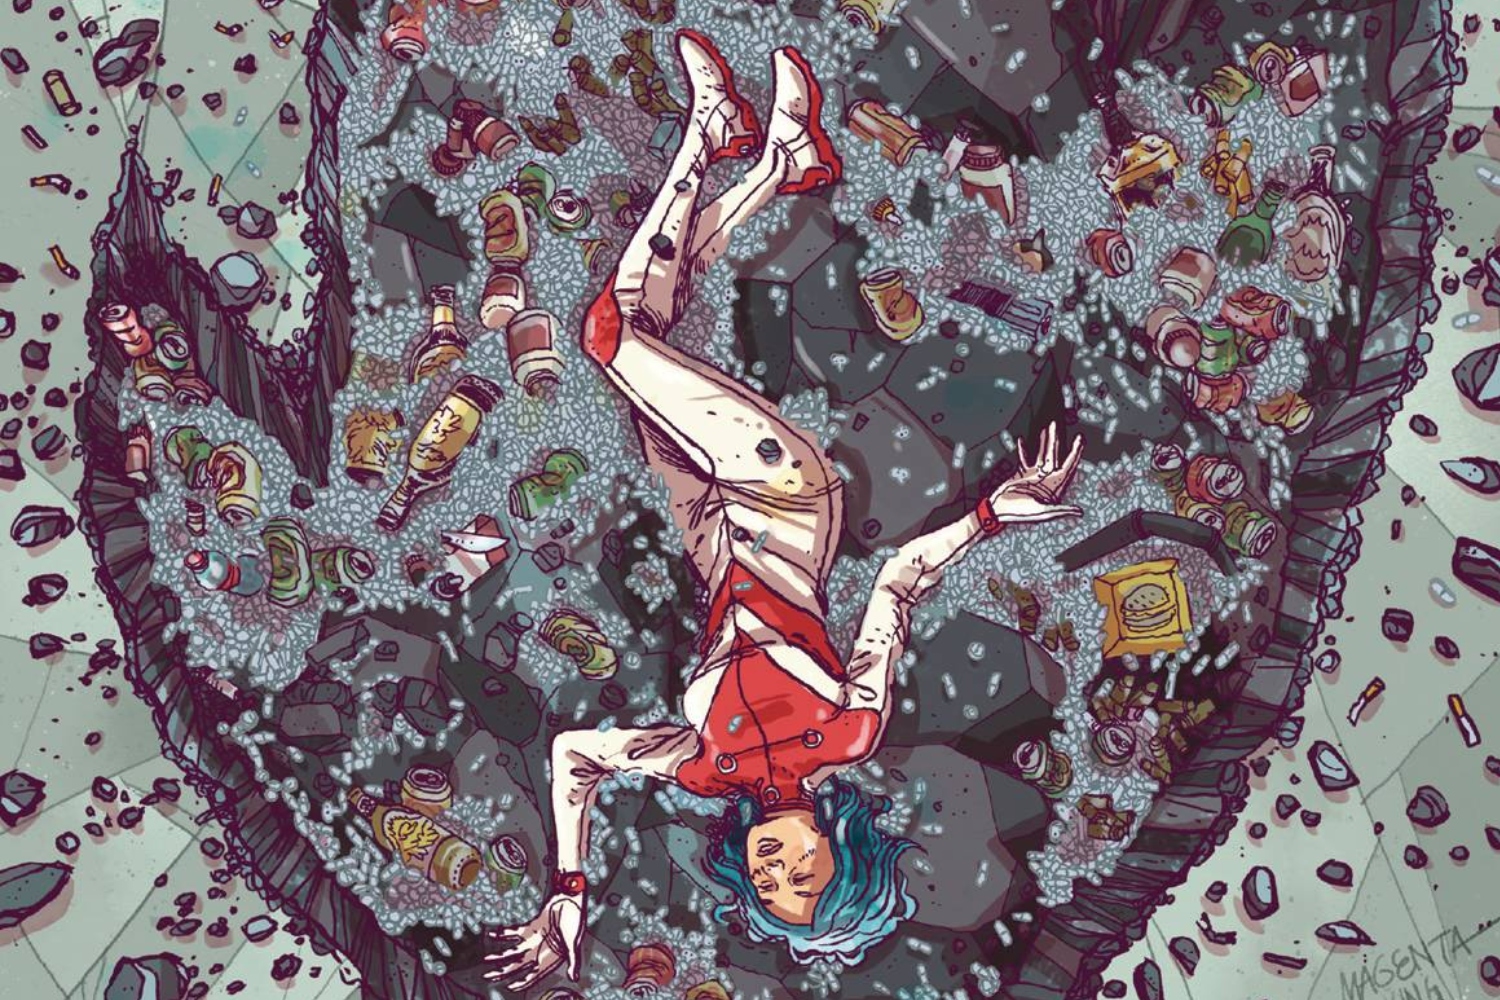 Dave Dwonch and Brockton McKinney talk addiction and overgrown beasts in 'Jenny Zero'